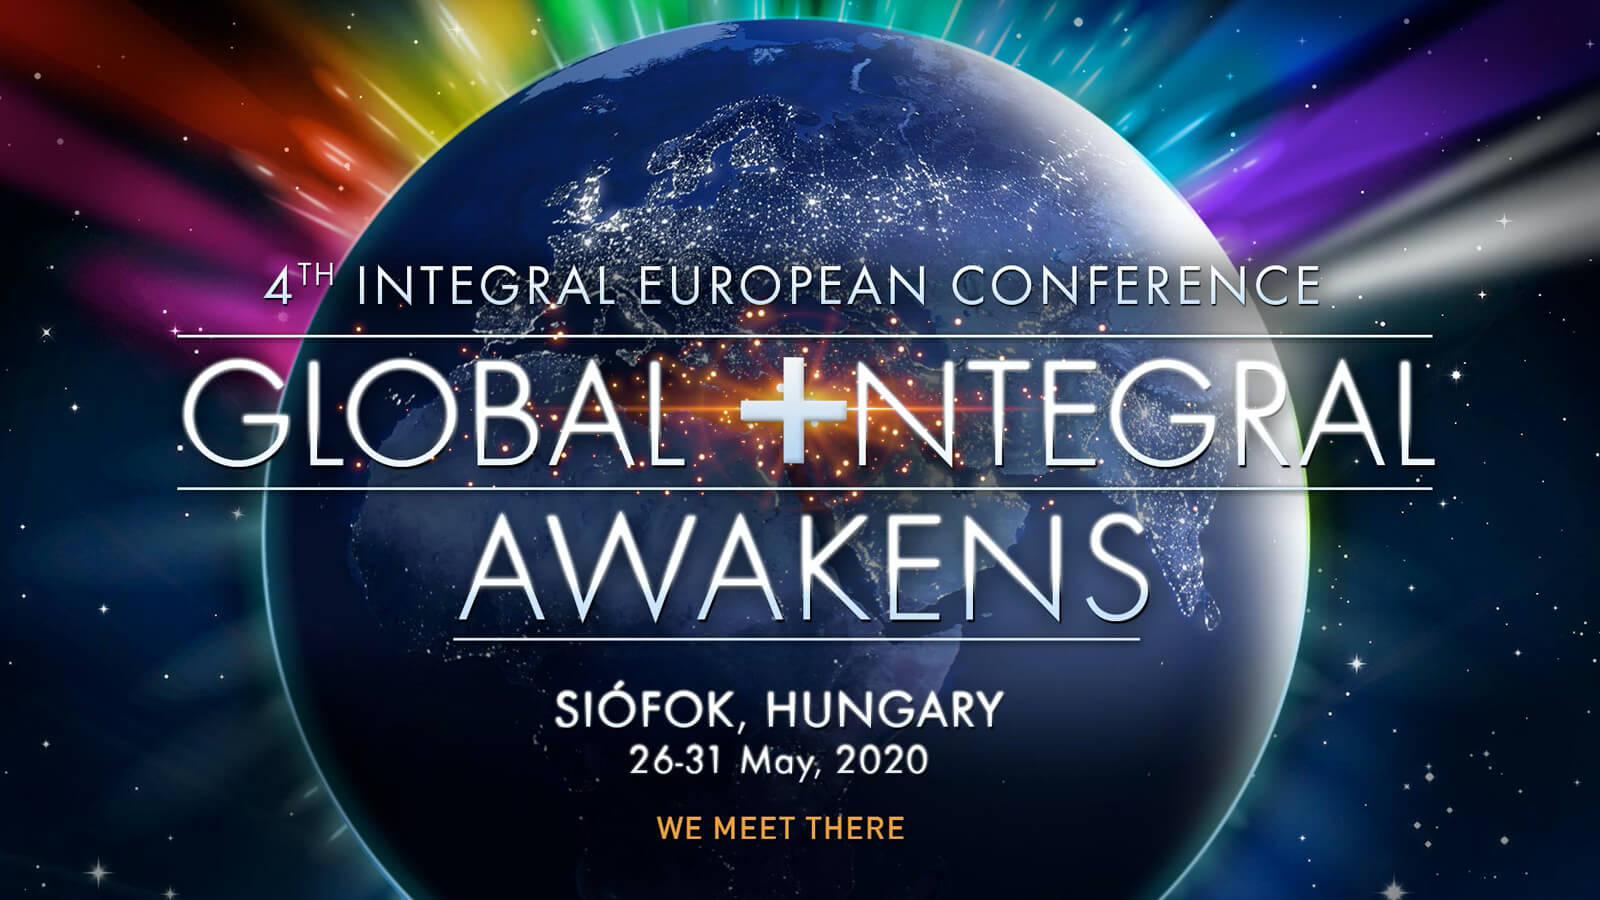 2020 Integral European Conference Preview